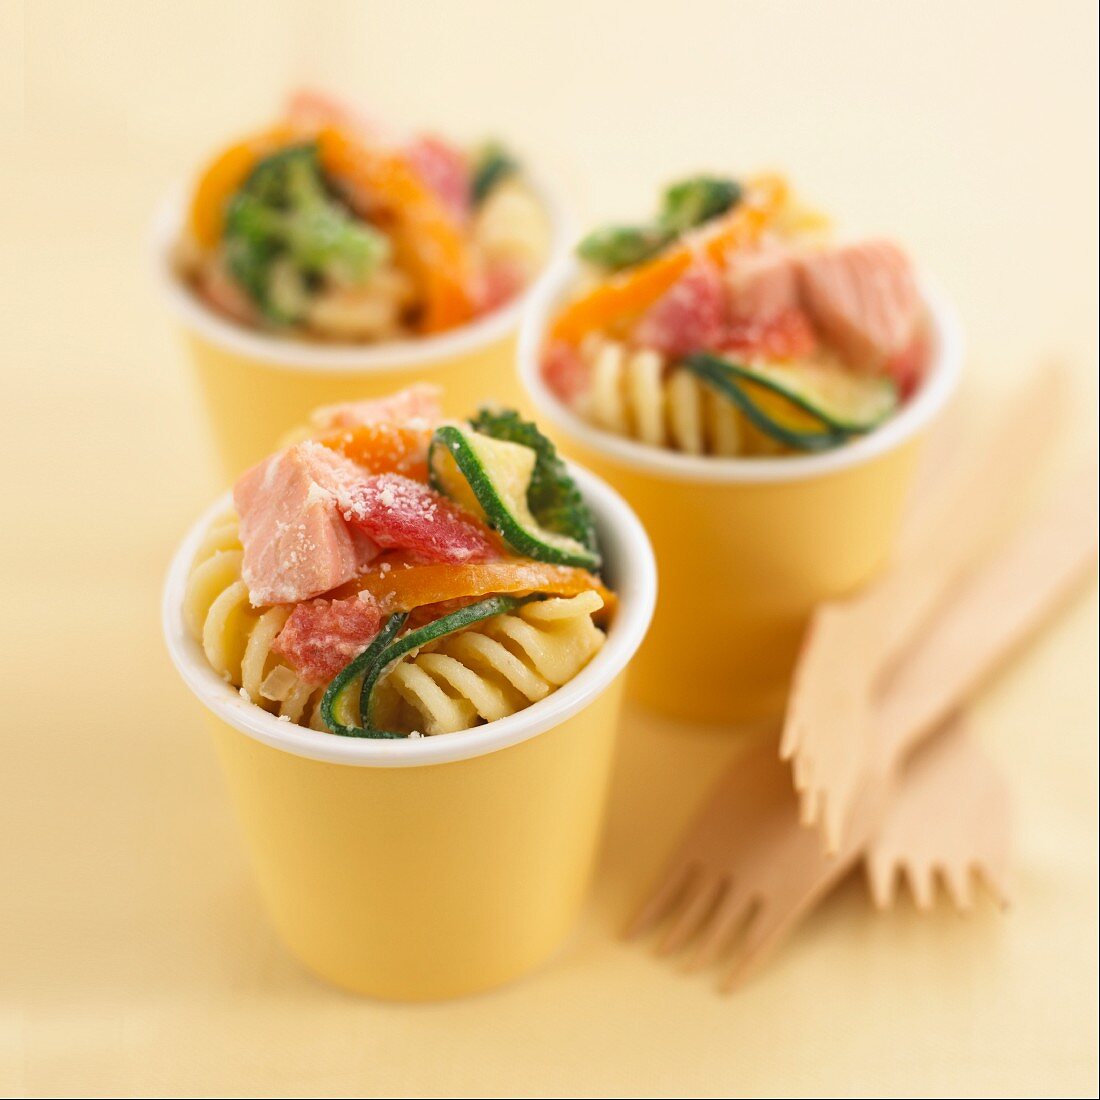 Pasta salad with salmon and vegetables